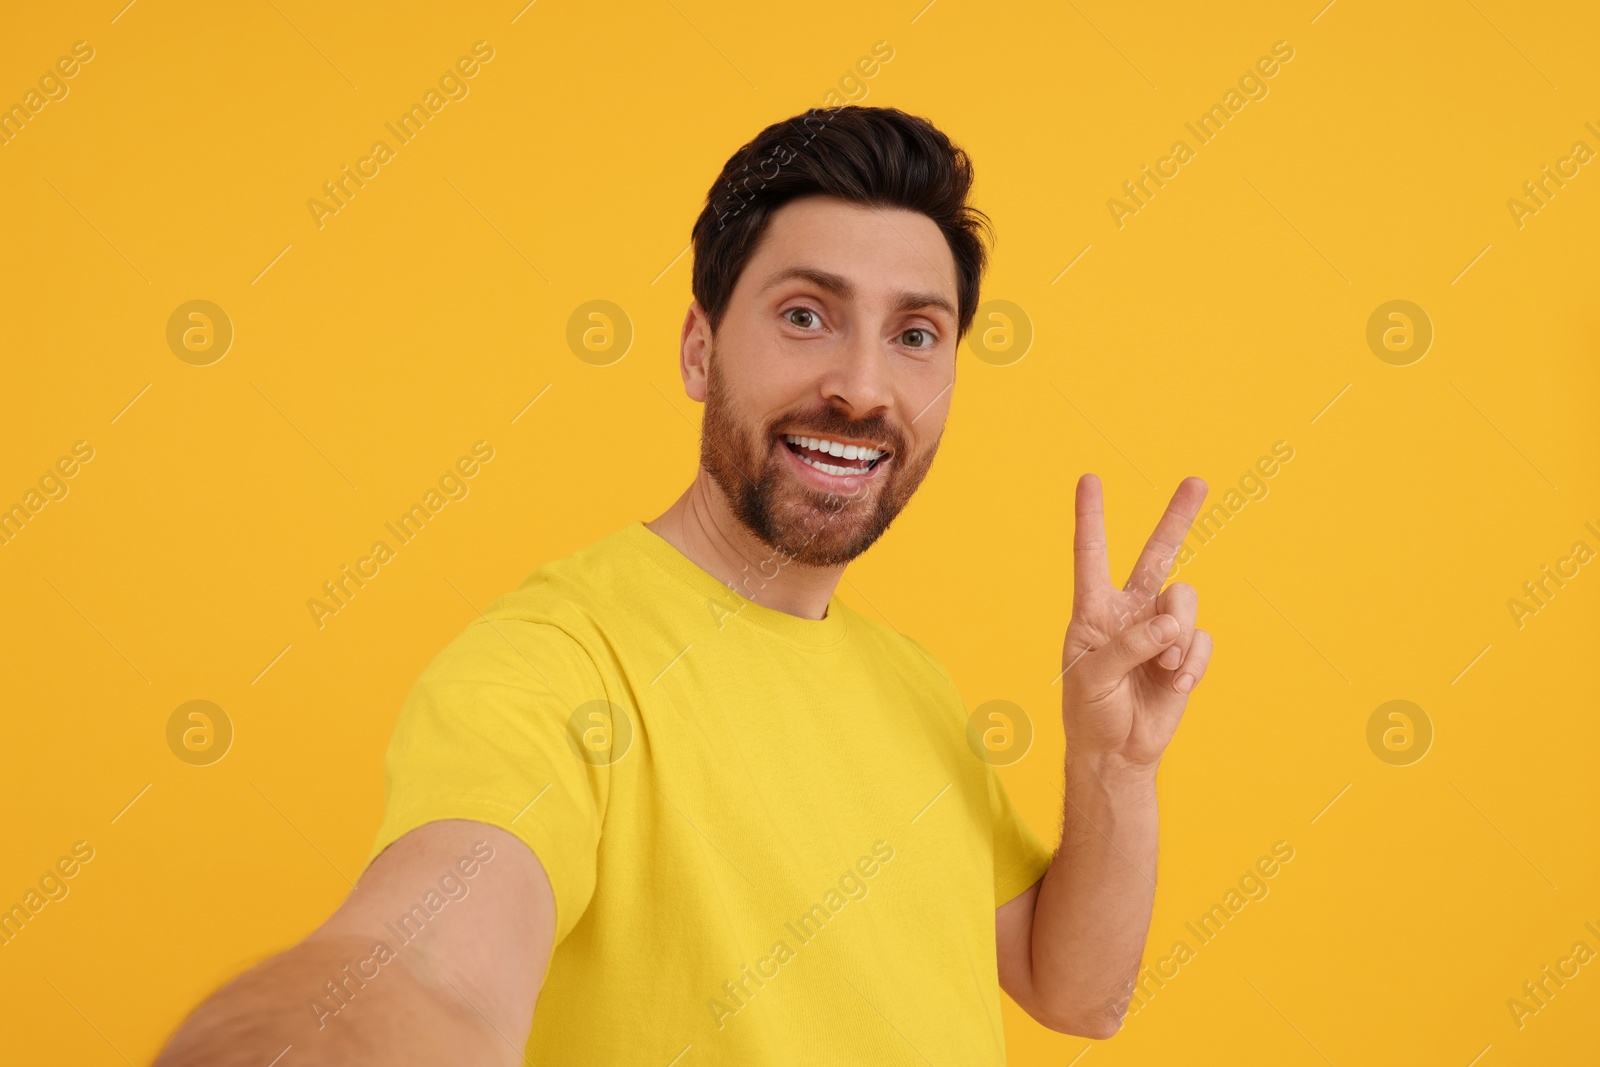 Photo of Smiling man taking selfie and showing peace sign on yellow background